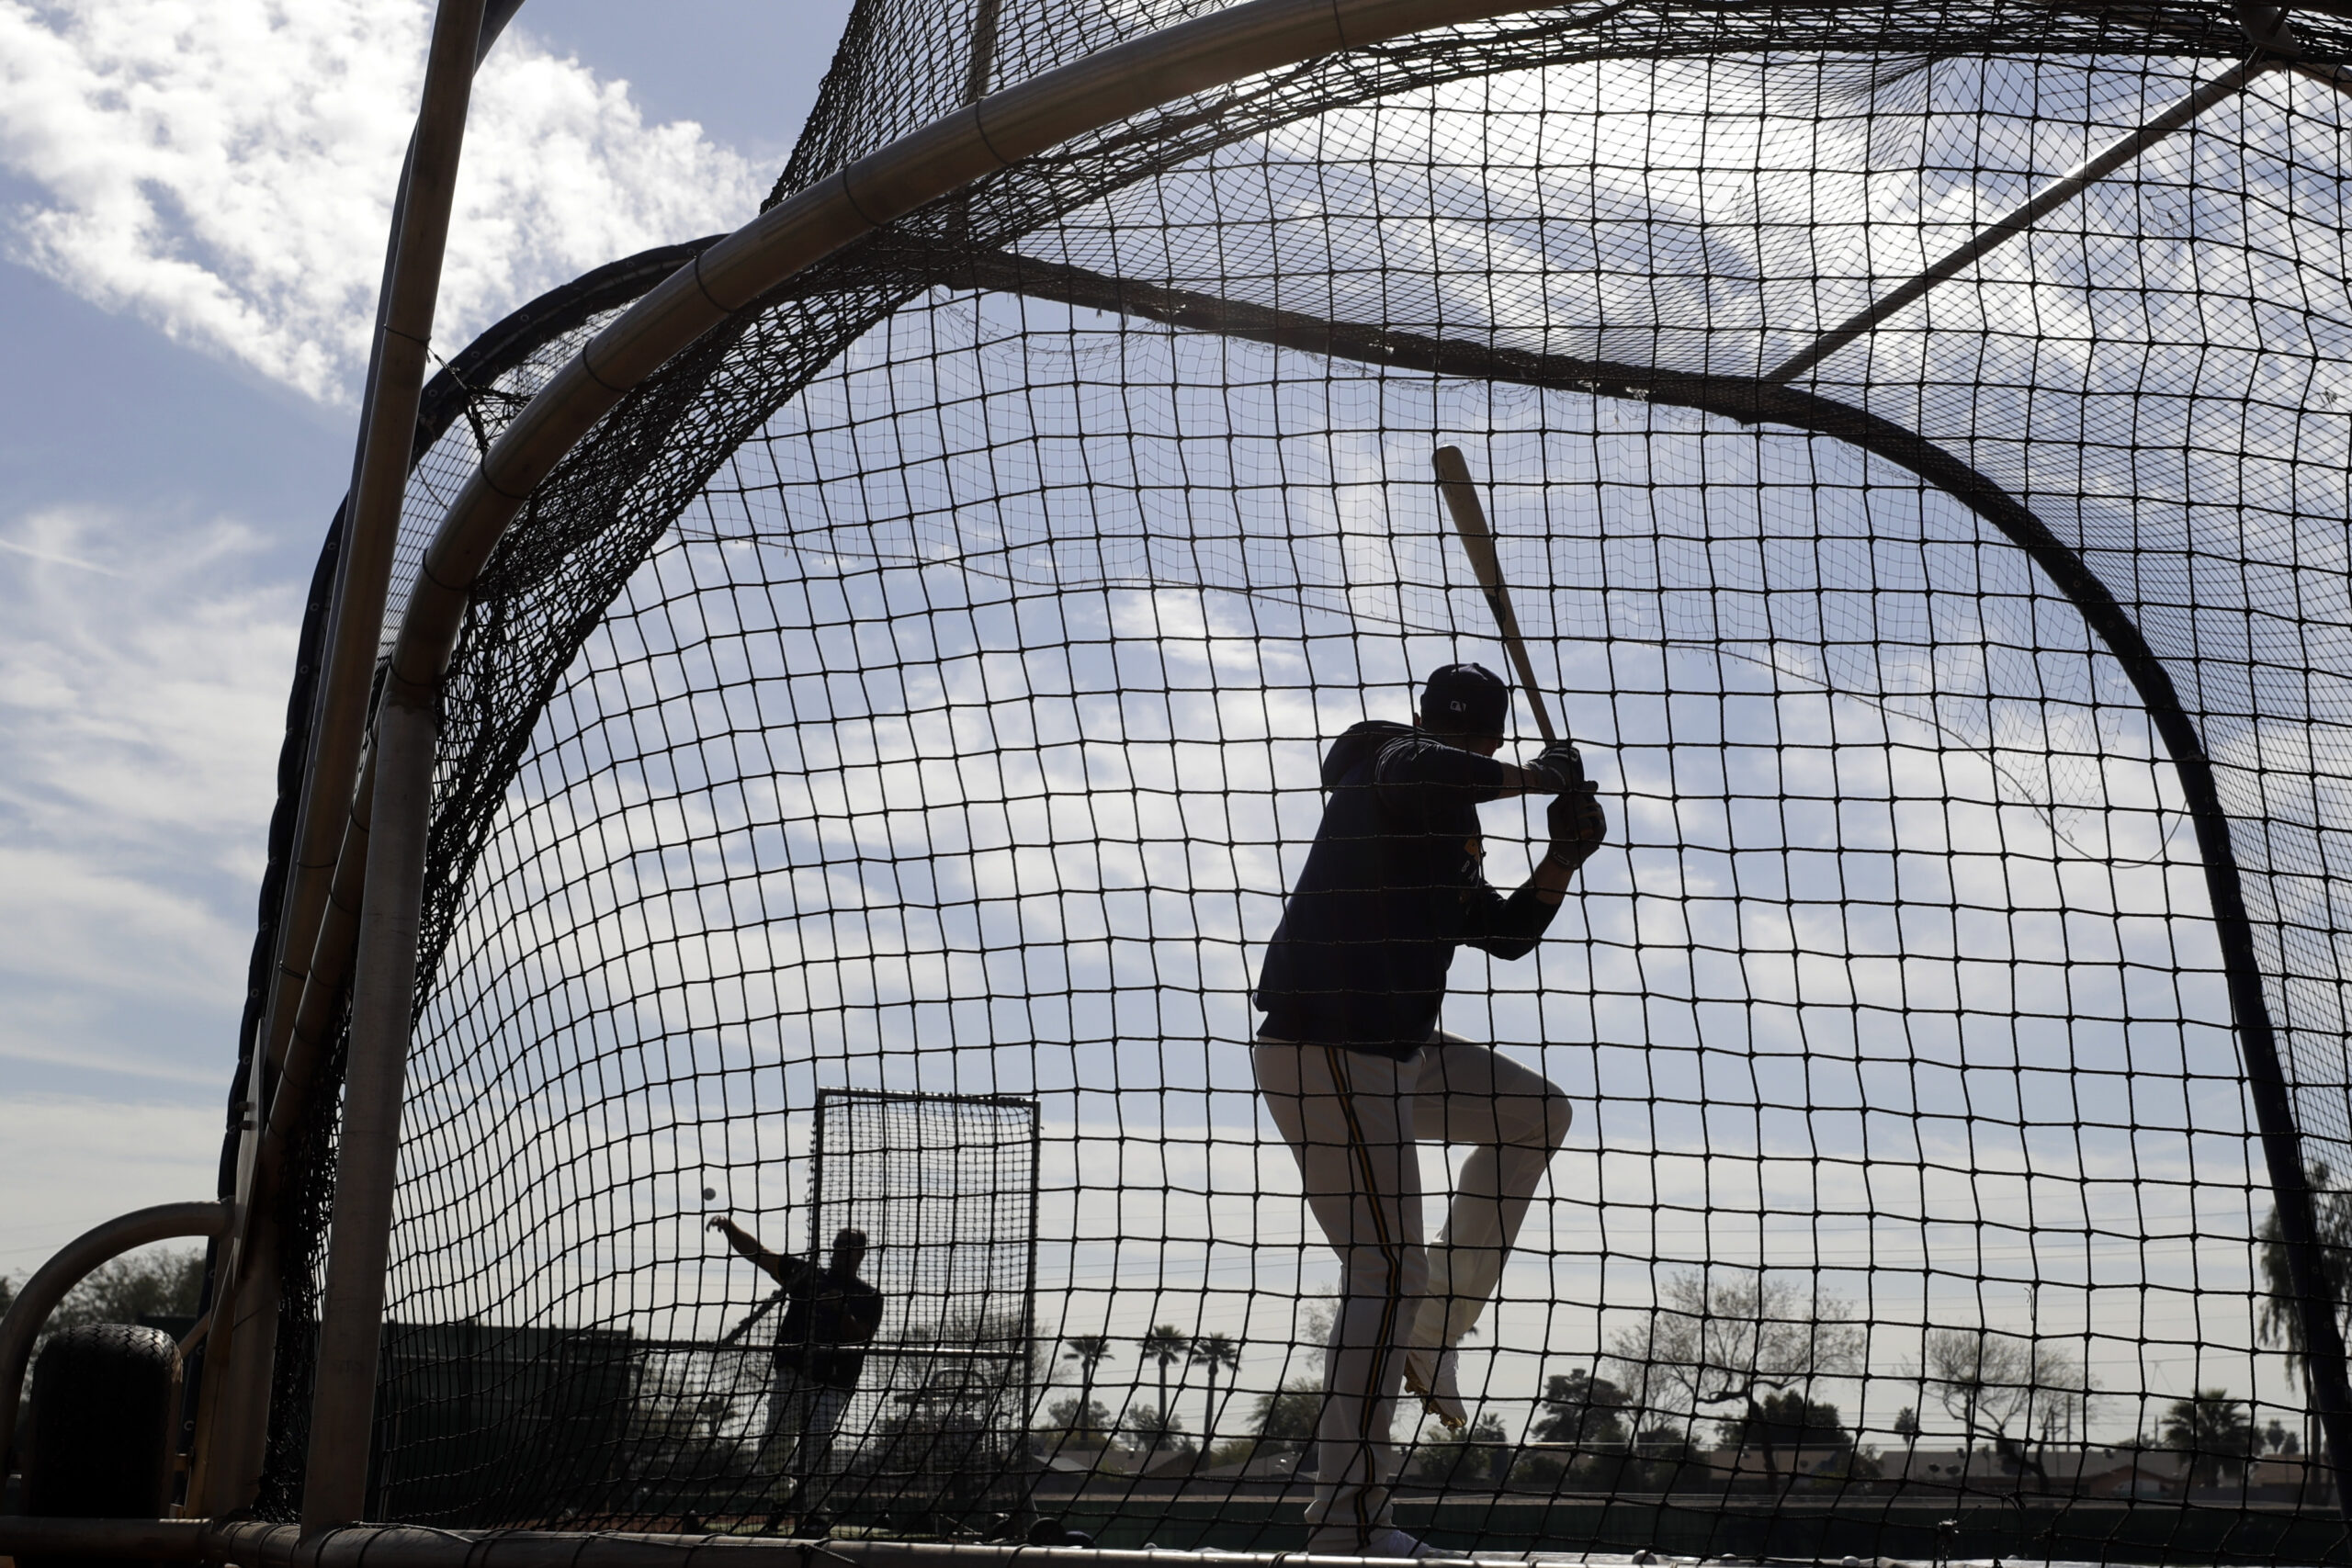 A Milwaukee Brewers player takes batting practice in Phoenix